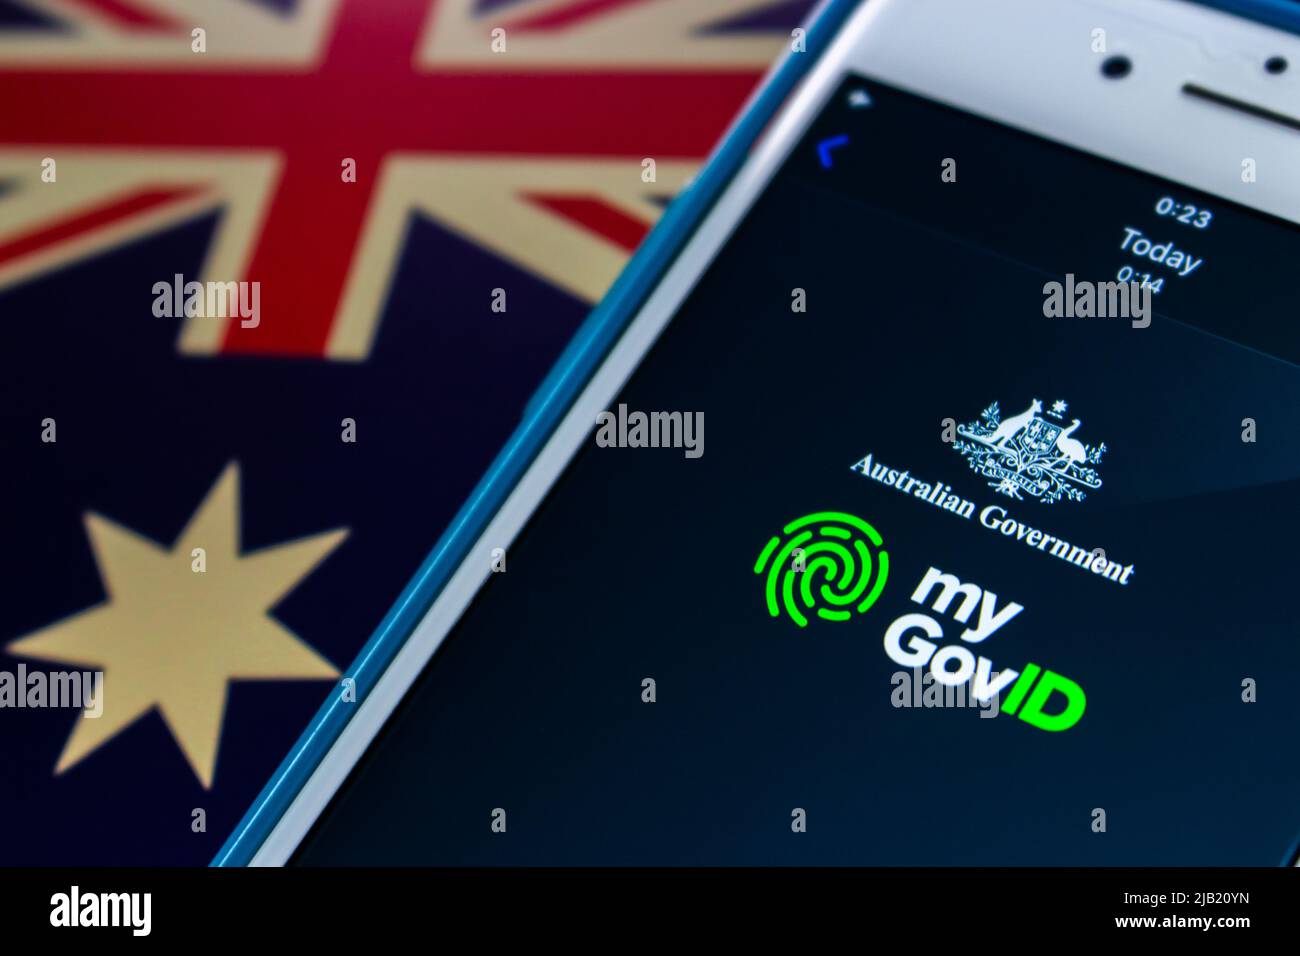 myGovID, the Australian Government's app that allows users to authenticate with Australian Government websites, on iPhone on the Australian flag Stock Photo